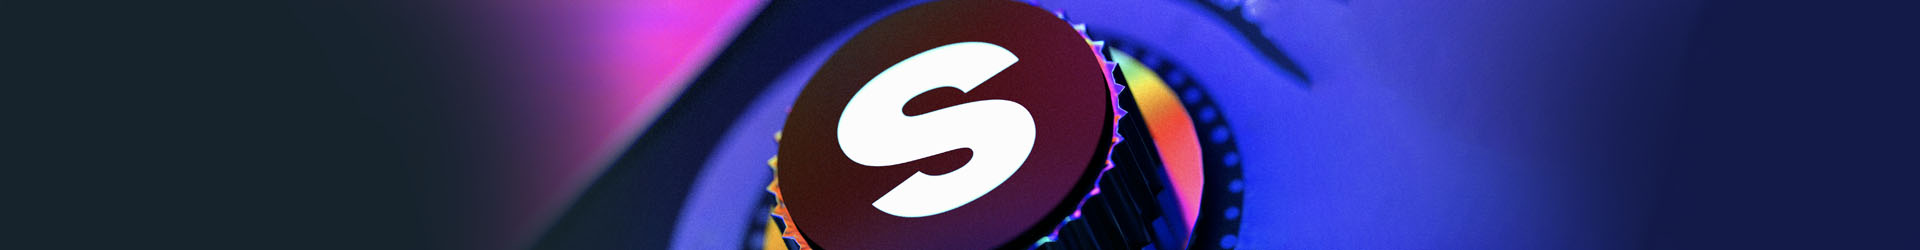 Splice x Spinnin' Records launches the Psytrance sample pack!